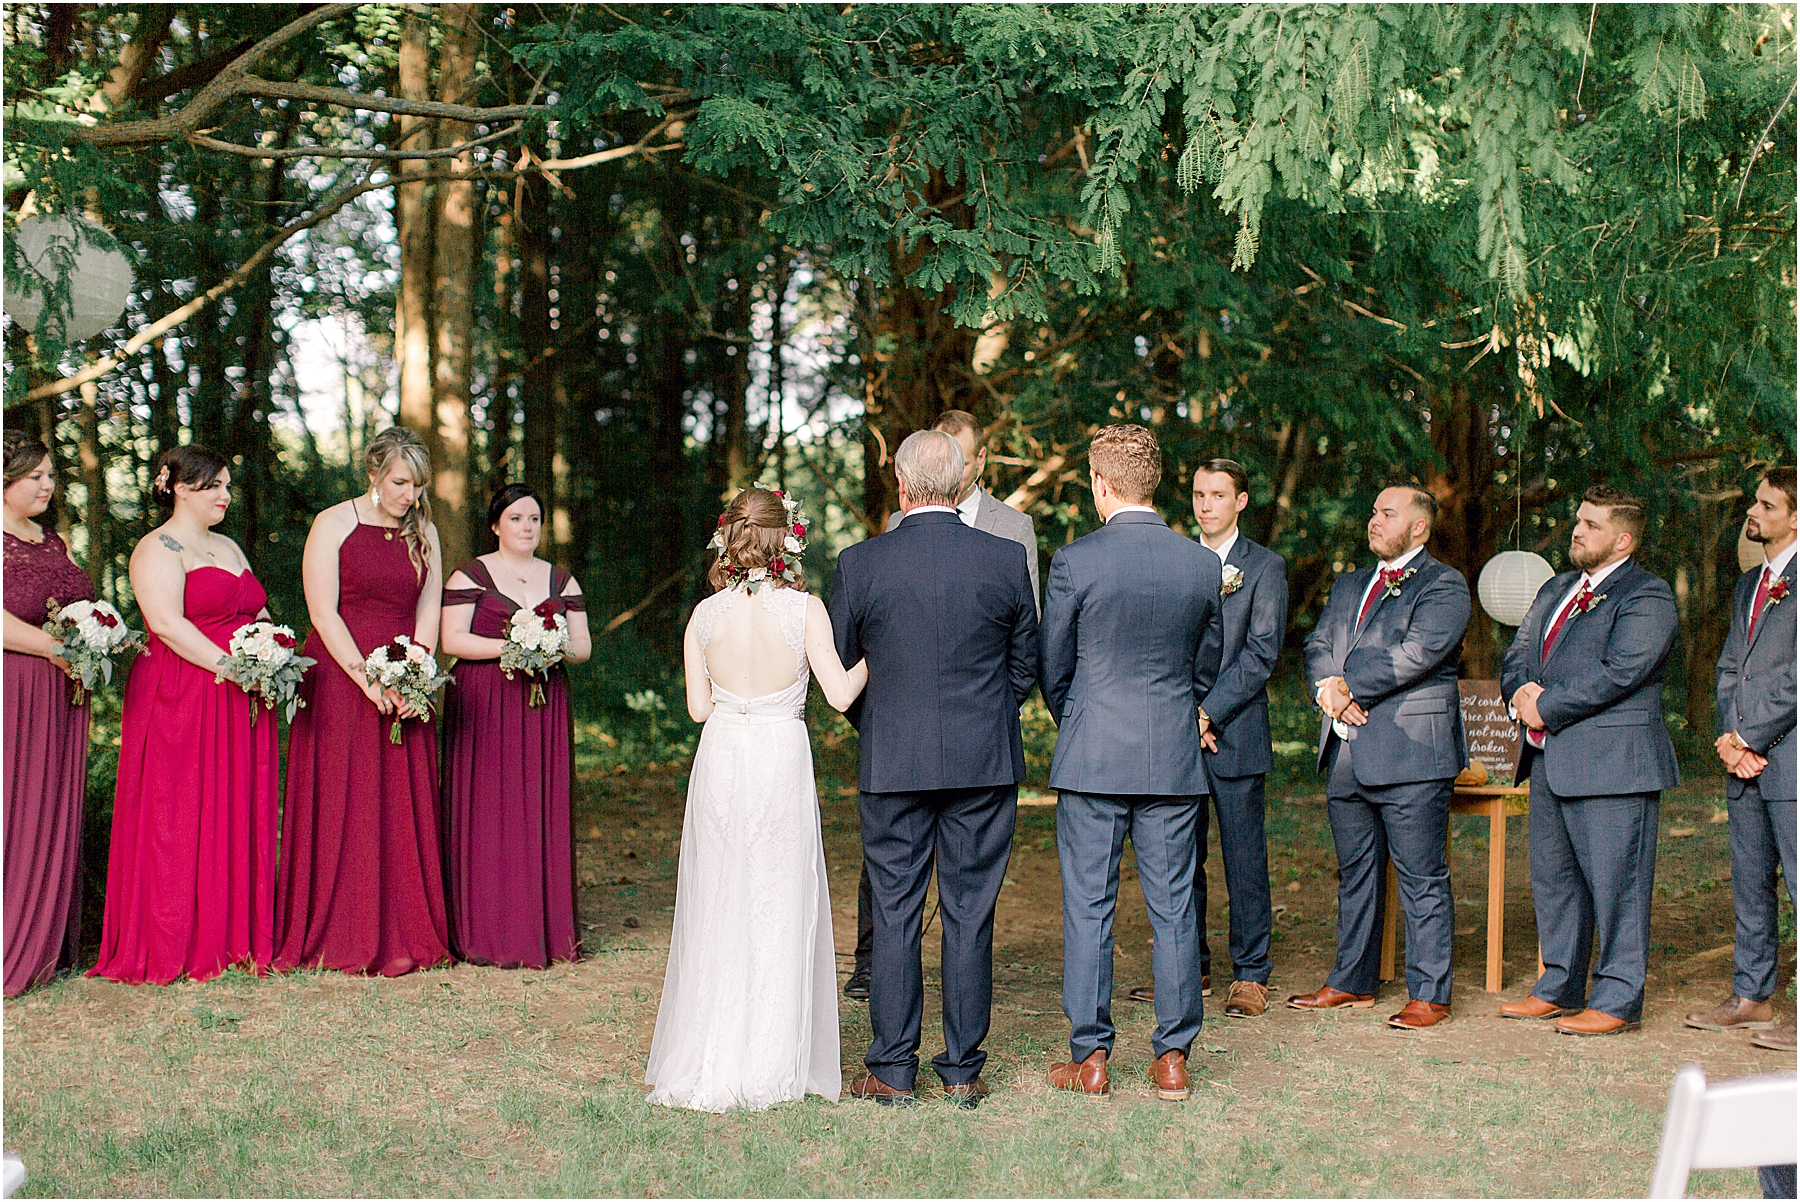 whimsical wedding under the trees at summer camp wedding